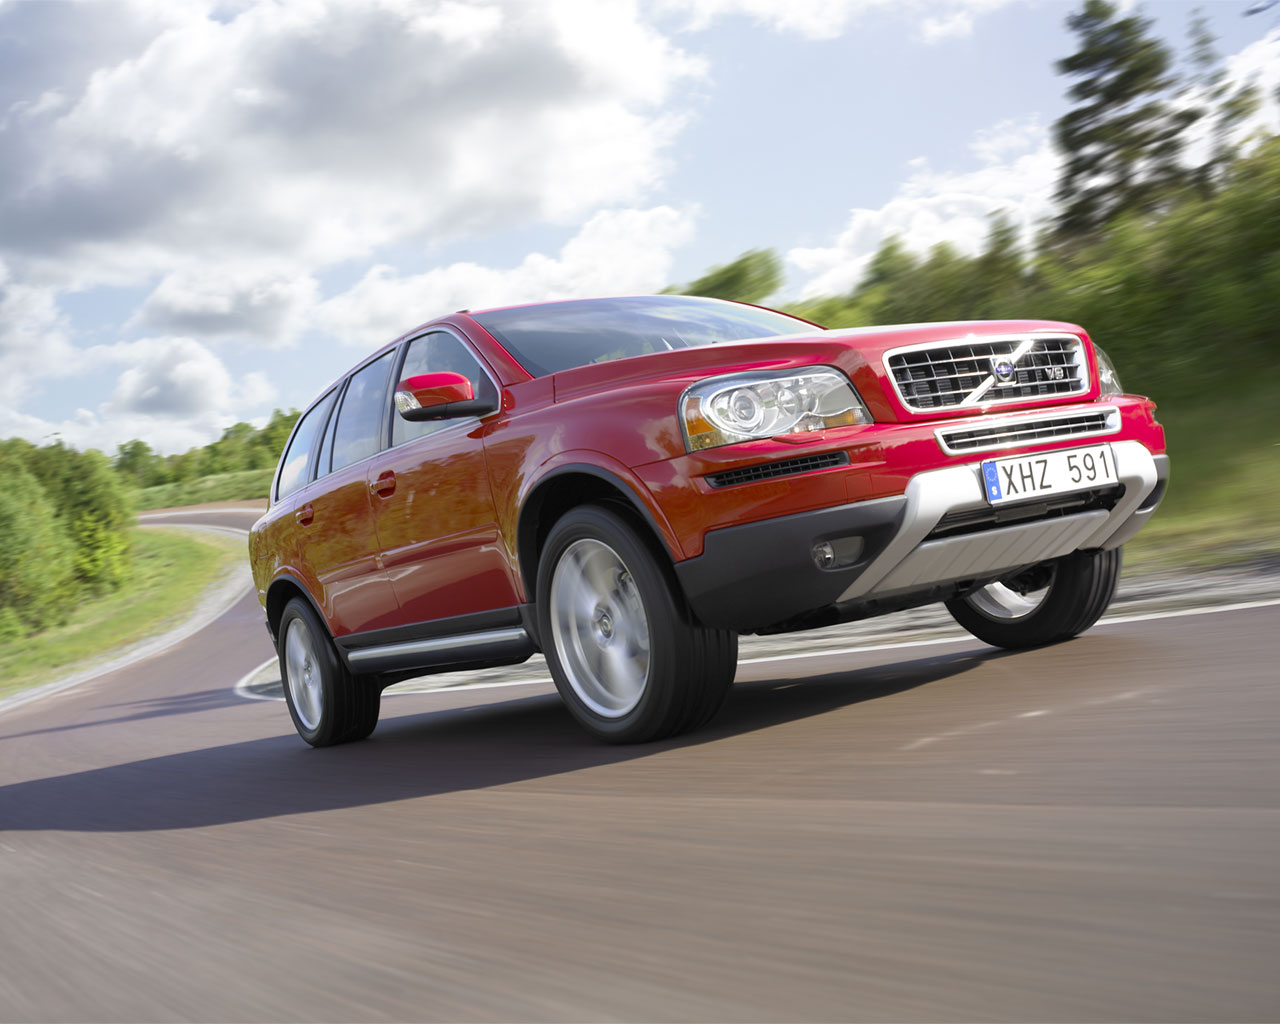 Volvo XC90 experimental - Get car information and expert advice from